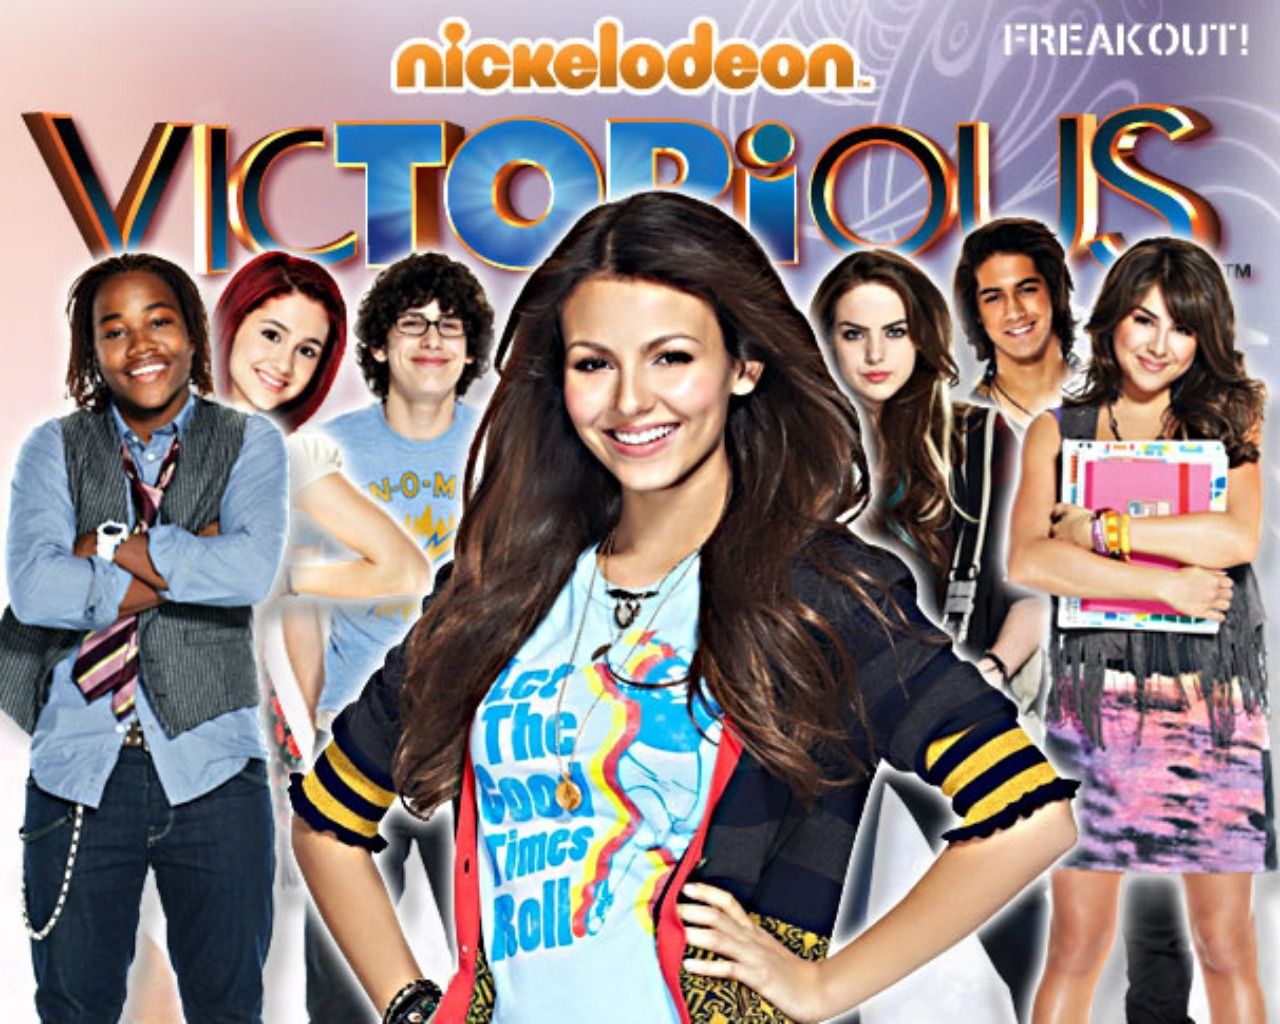 Victorious Wallpaper. Victorious